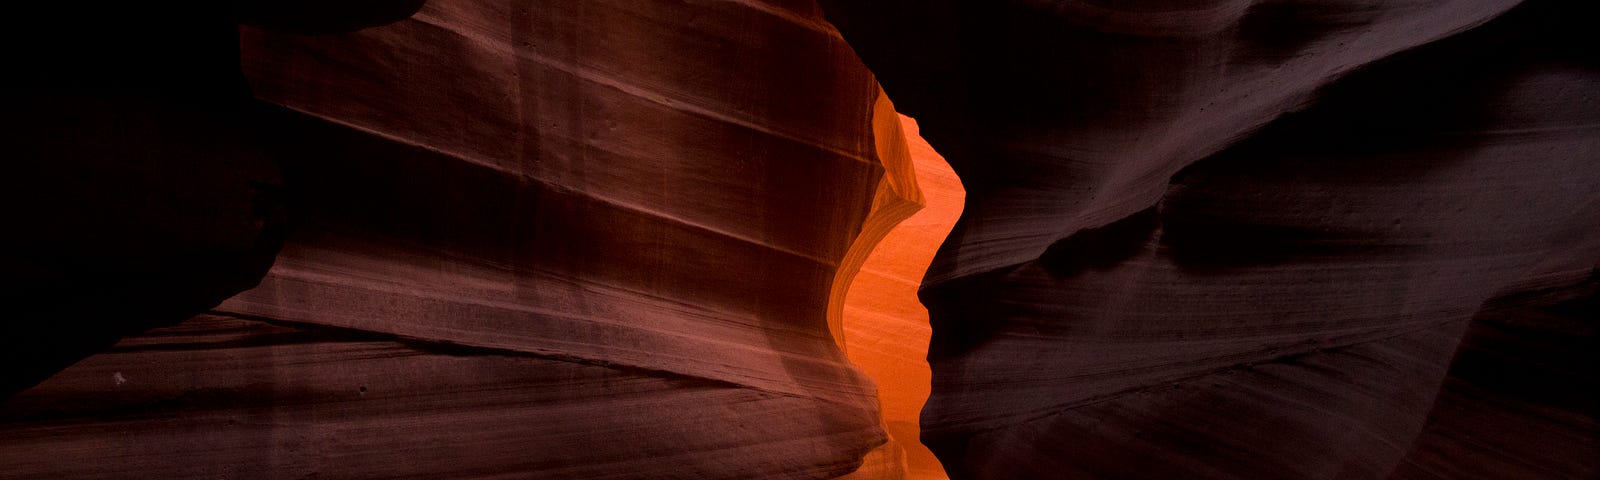 light filled crevice in red rock